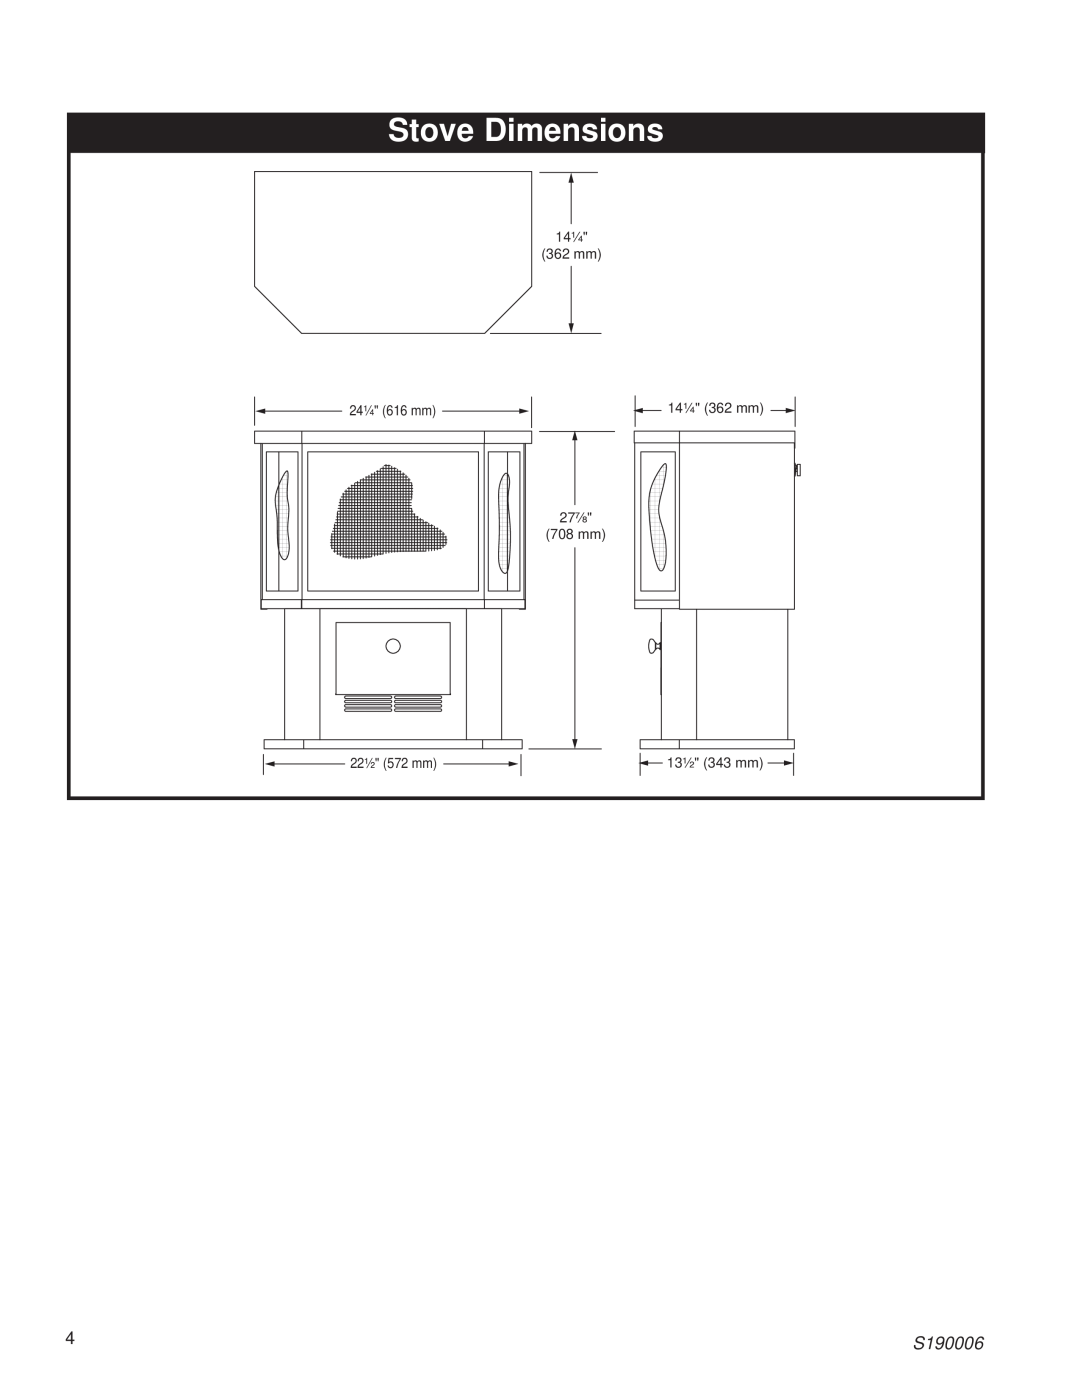 Century HES80 installation instructions Stove Dimensions, S190006, 14¹⁄₄ 362 mm, 27⁷⁄₈, 13¹⁄₂ 343 mm 